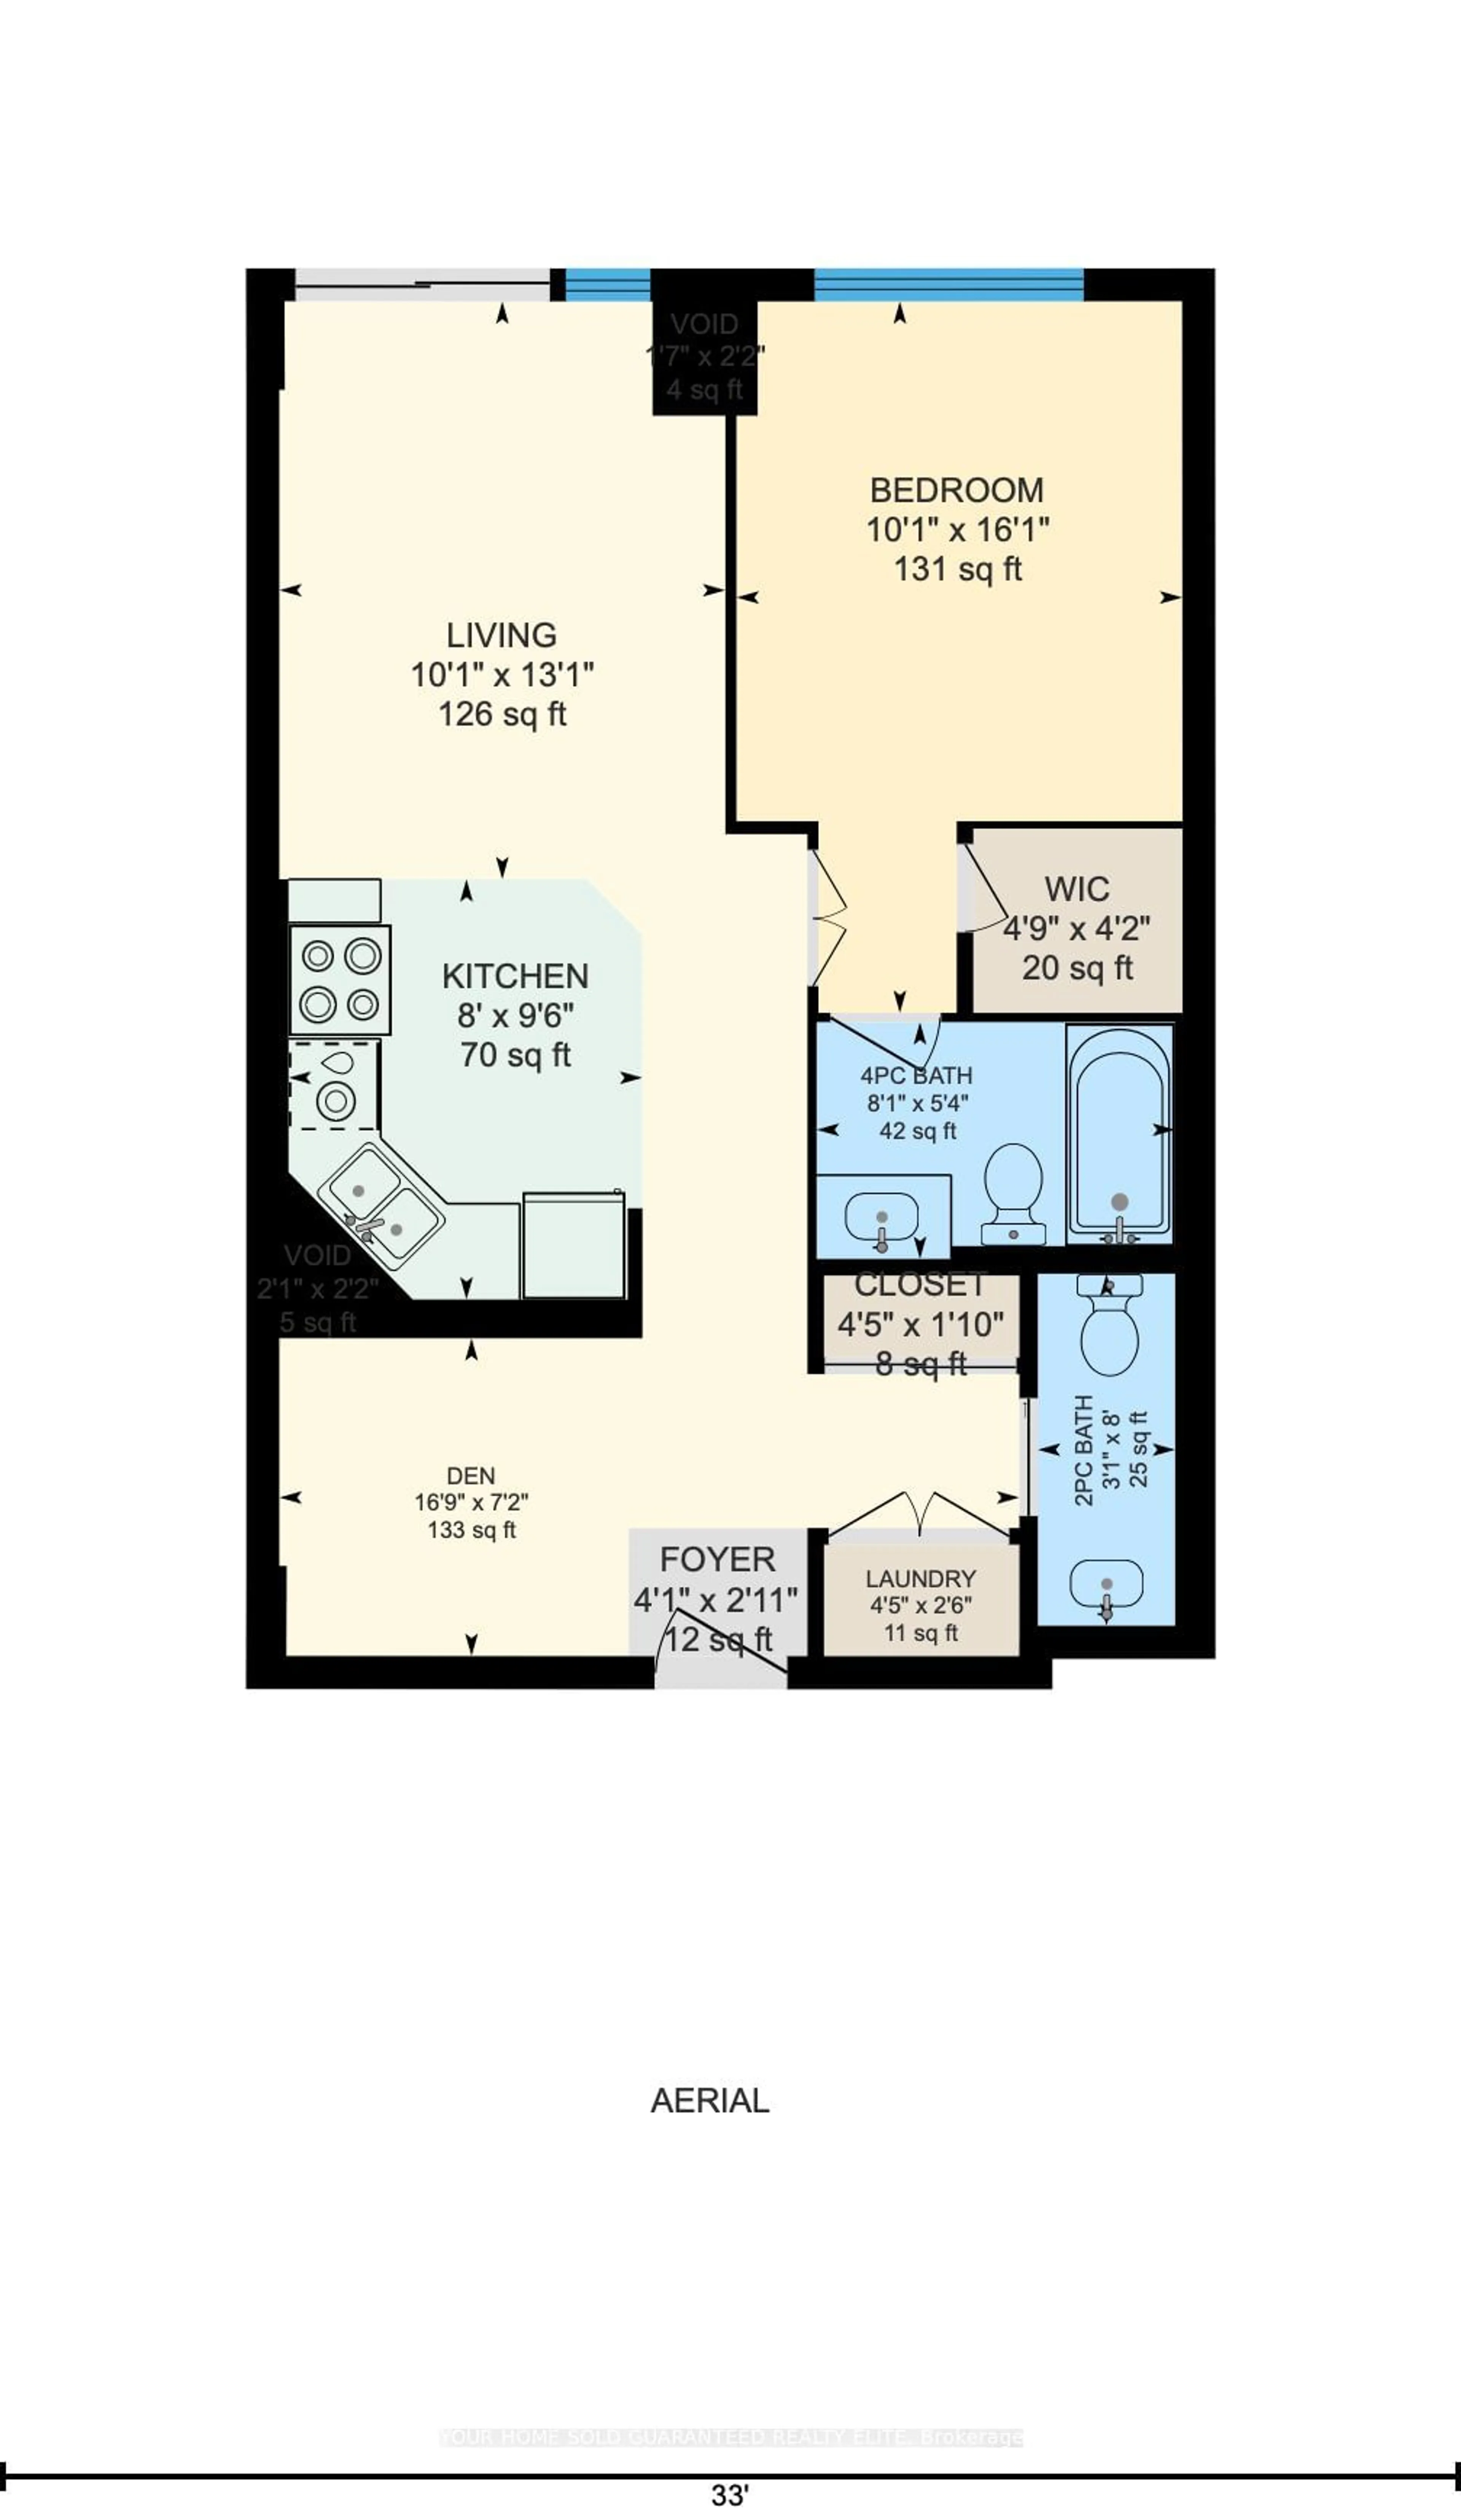 Floor plan for 560 North Service Rd #505, Grimsby Ontario L3M 0G1